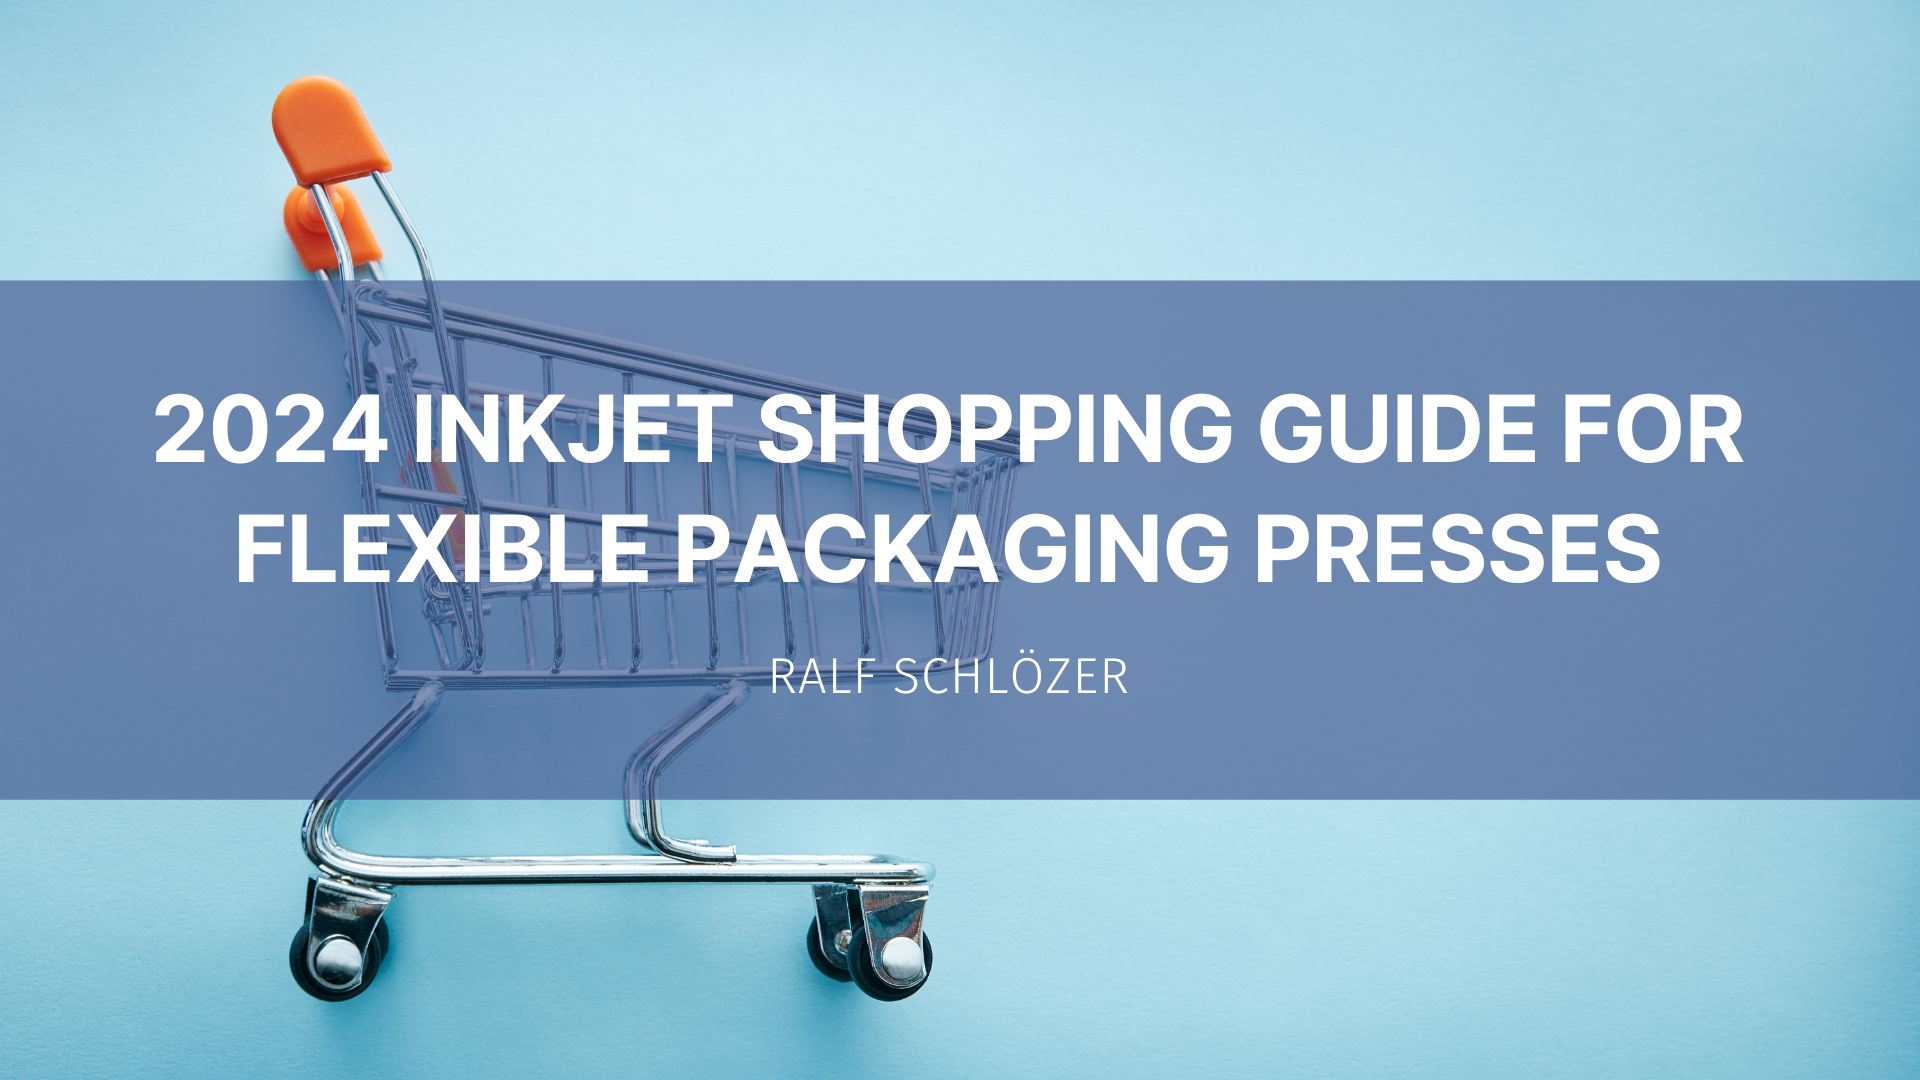 Featured image for “2024 Inkjet Shopping Guide for Flexible Packaging Presses”